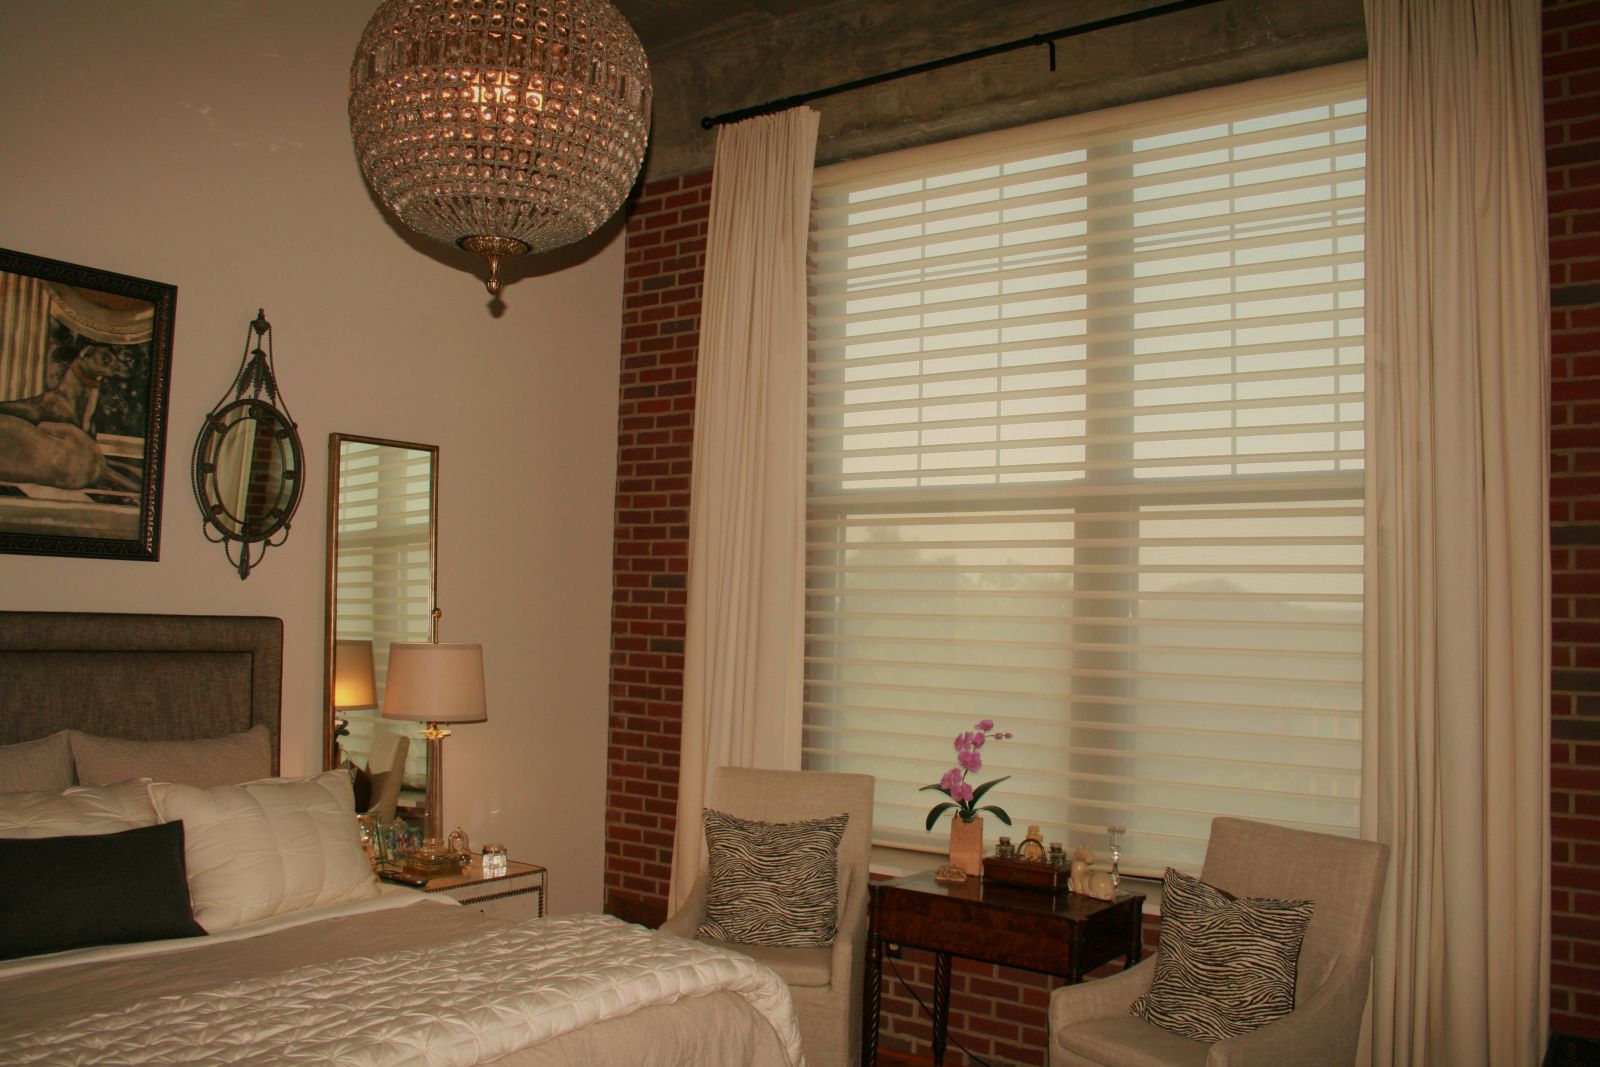 Hunter Douglas Silhouette shades in the bedroom